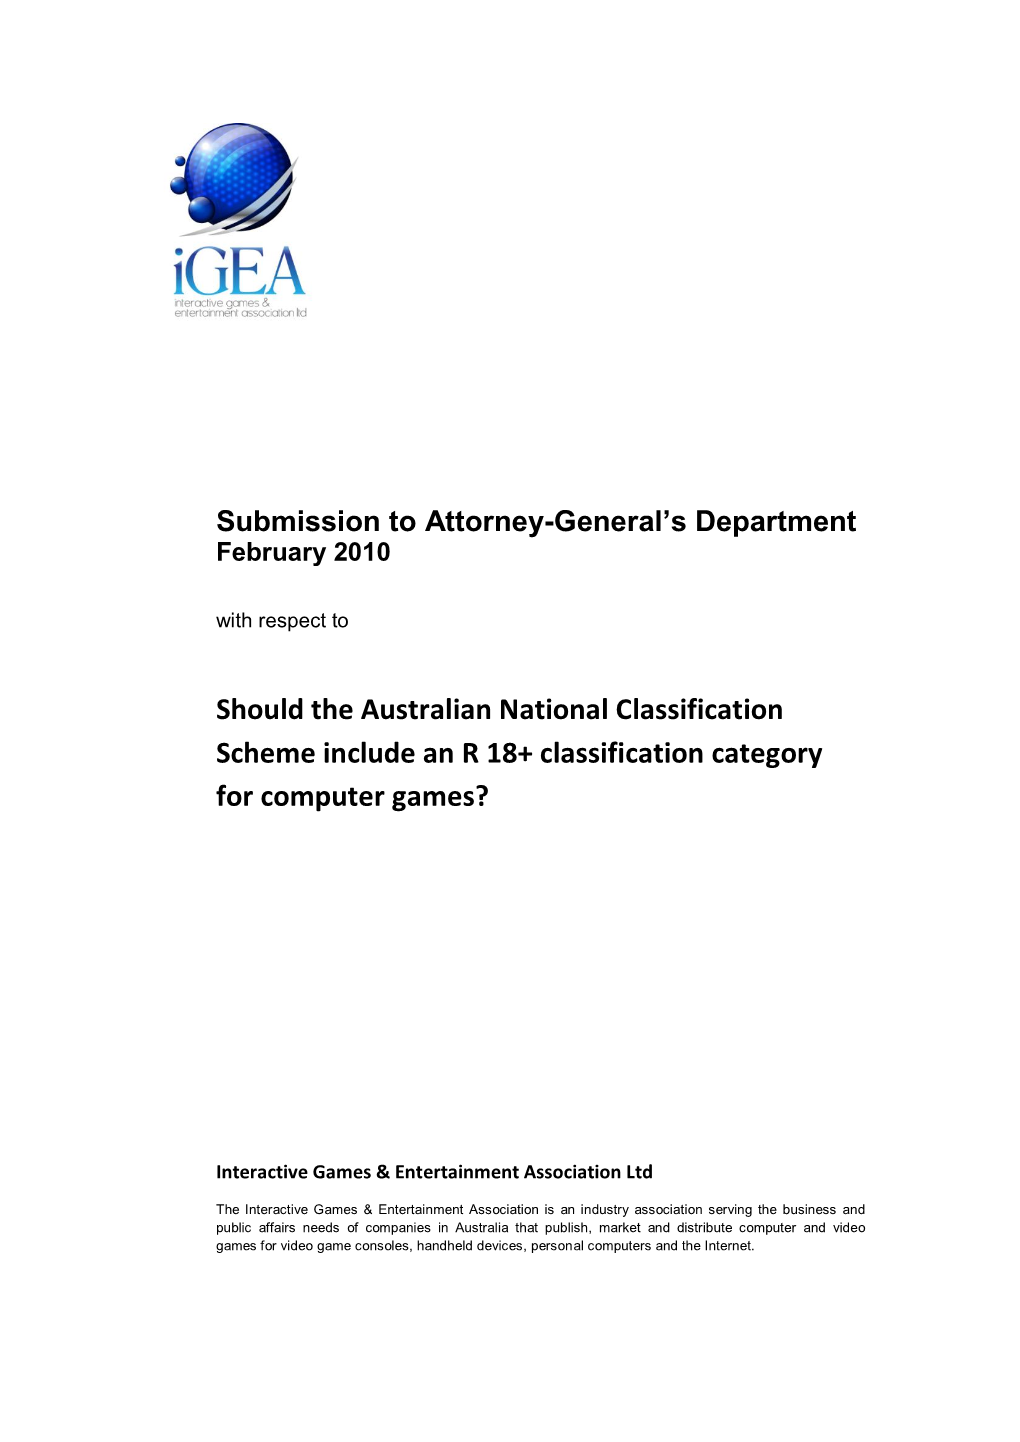 Should the Australian National Classification Scheme Include an R 18+ Classification Category for Computer Games?